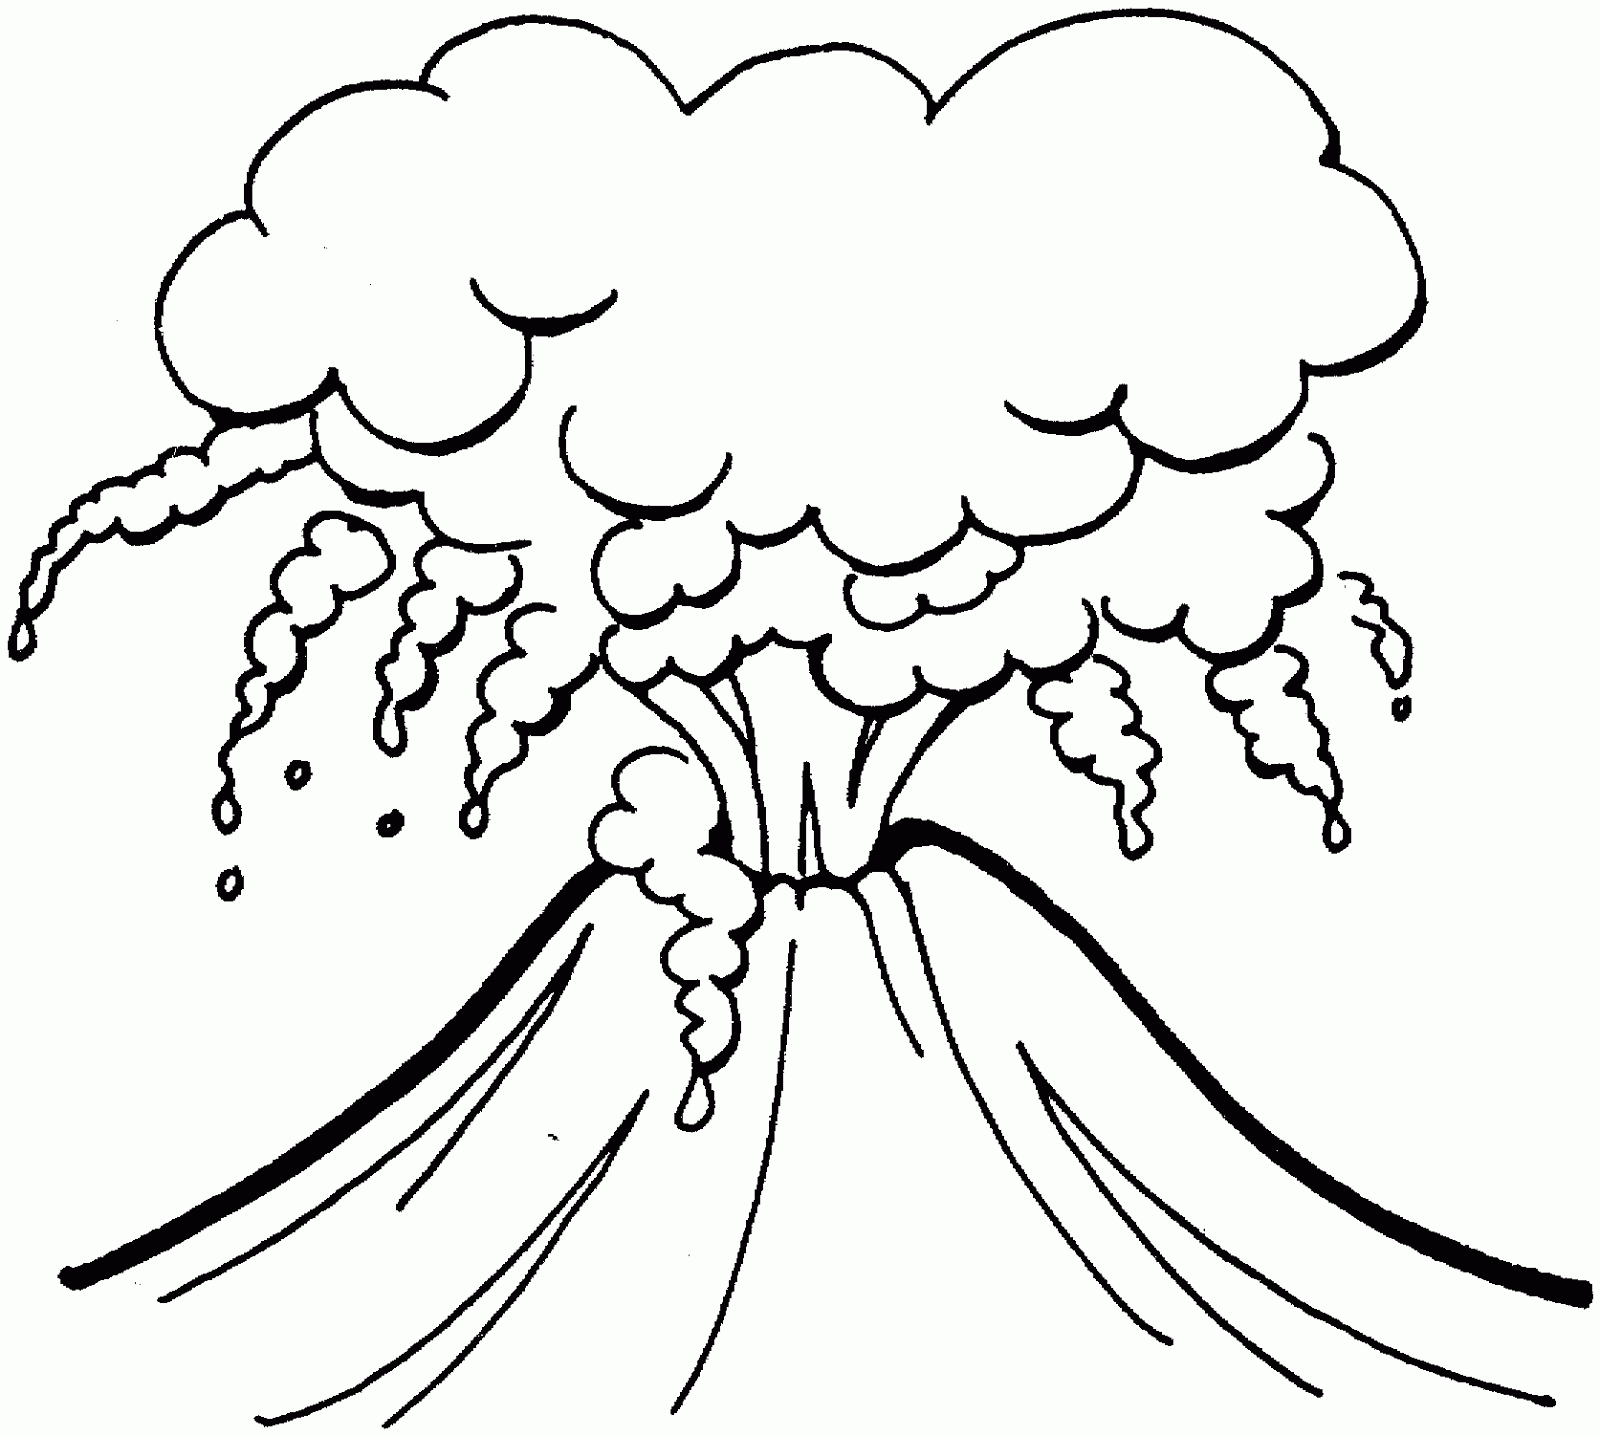 Black and white volcano pictures clipart